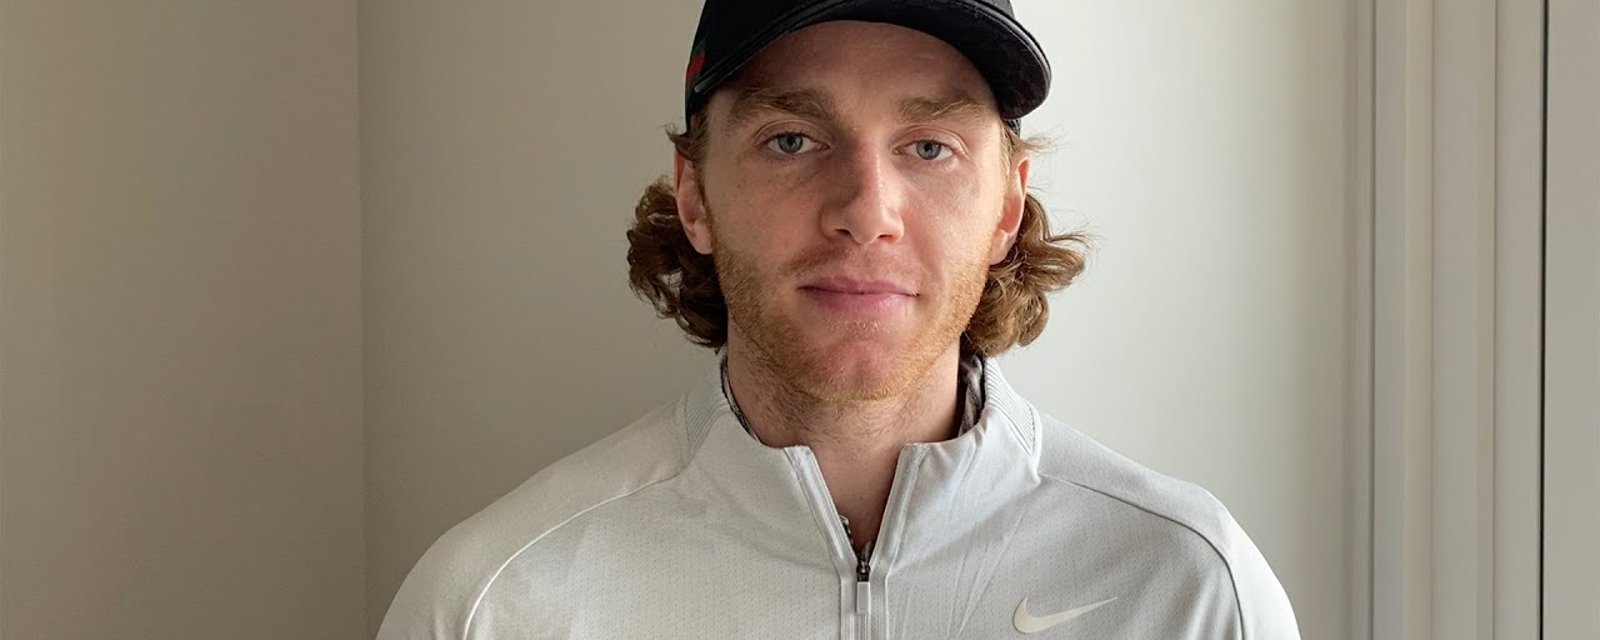 Patrick Kane turned down multi-year offers from other NHL teams!